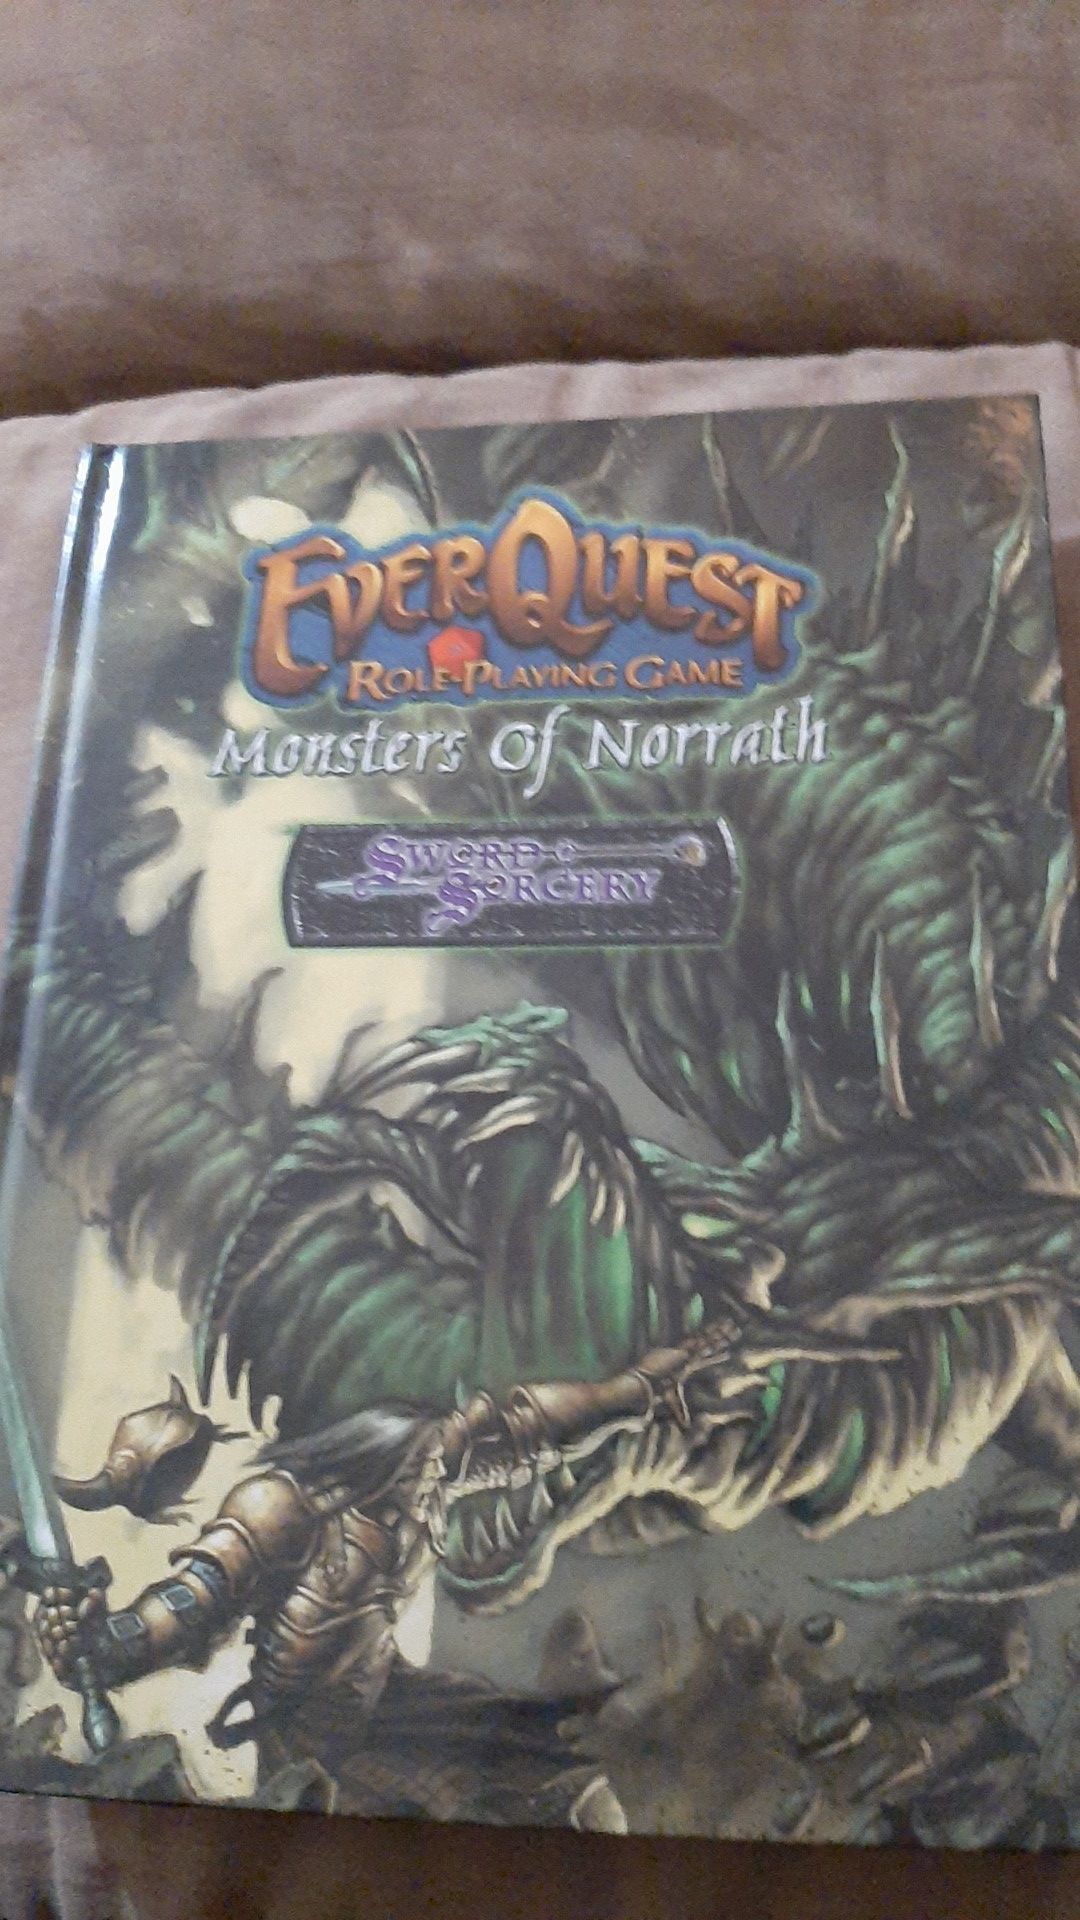 Everquest Monsters of Norrath Book